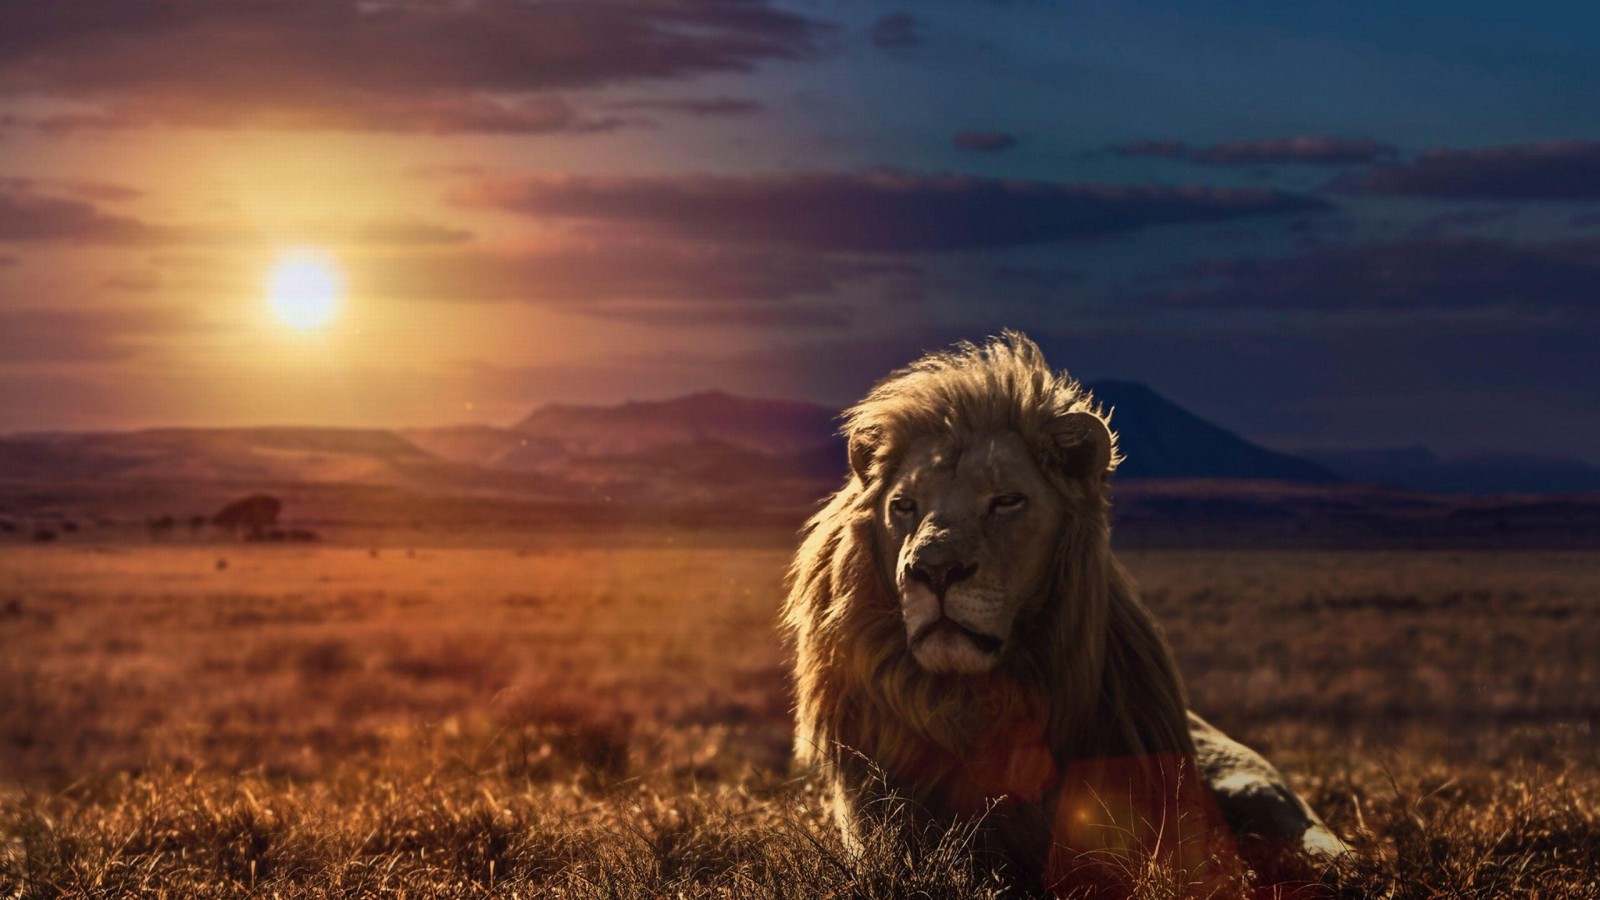 Lion Hd Wallpapers - Good Morning Stay Positive - 1600x900 Wallpaper -  